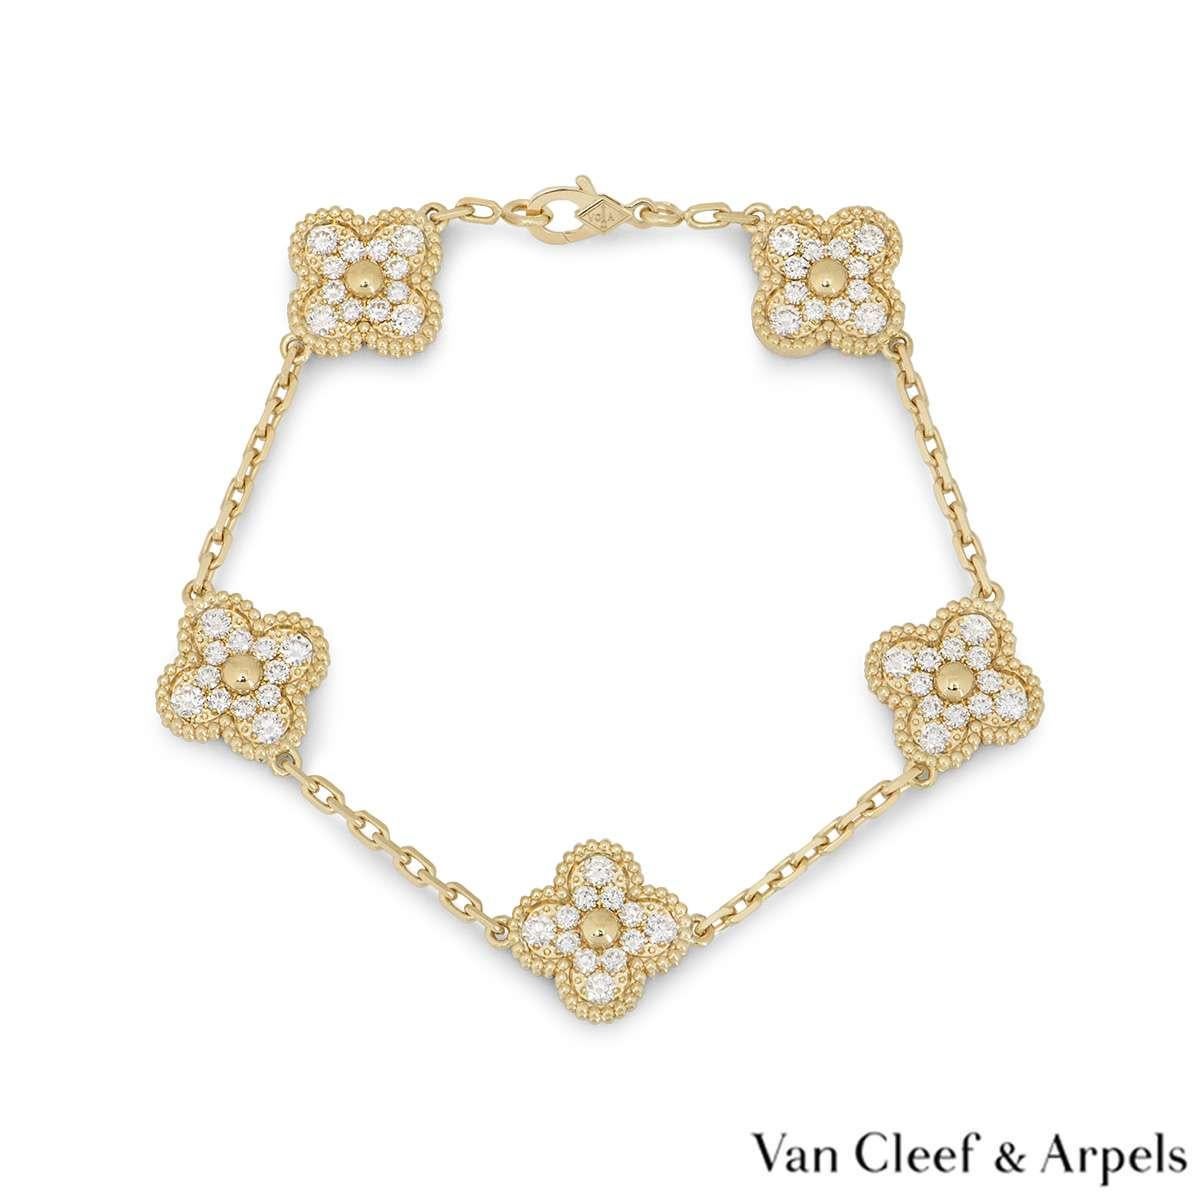 A timeless 18k yellow gold Vintage Alhambra bracelet by Van Cleef & Arpels. The bracelet features 5 pave diamond set clover motifs, complemented by a gold beaded outer edge. There are 60 round brilliant cut diamonds, with a total weight of 2.42ct,